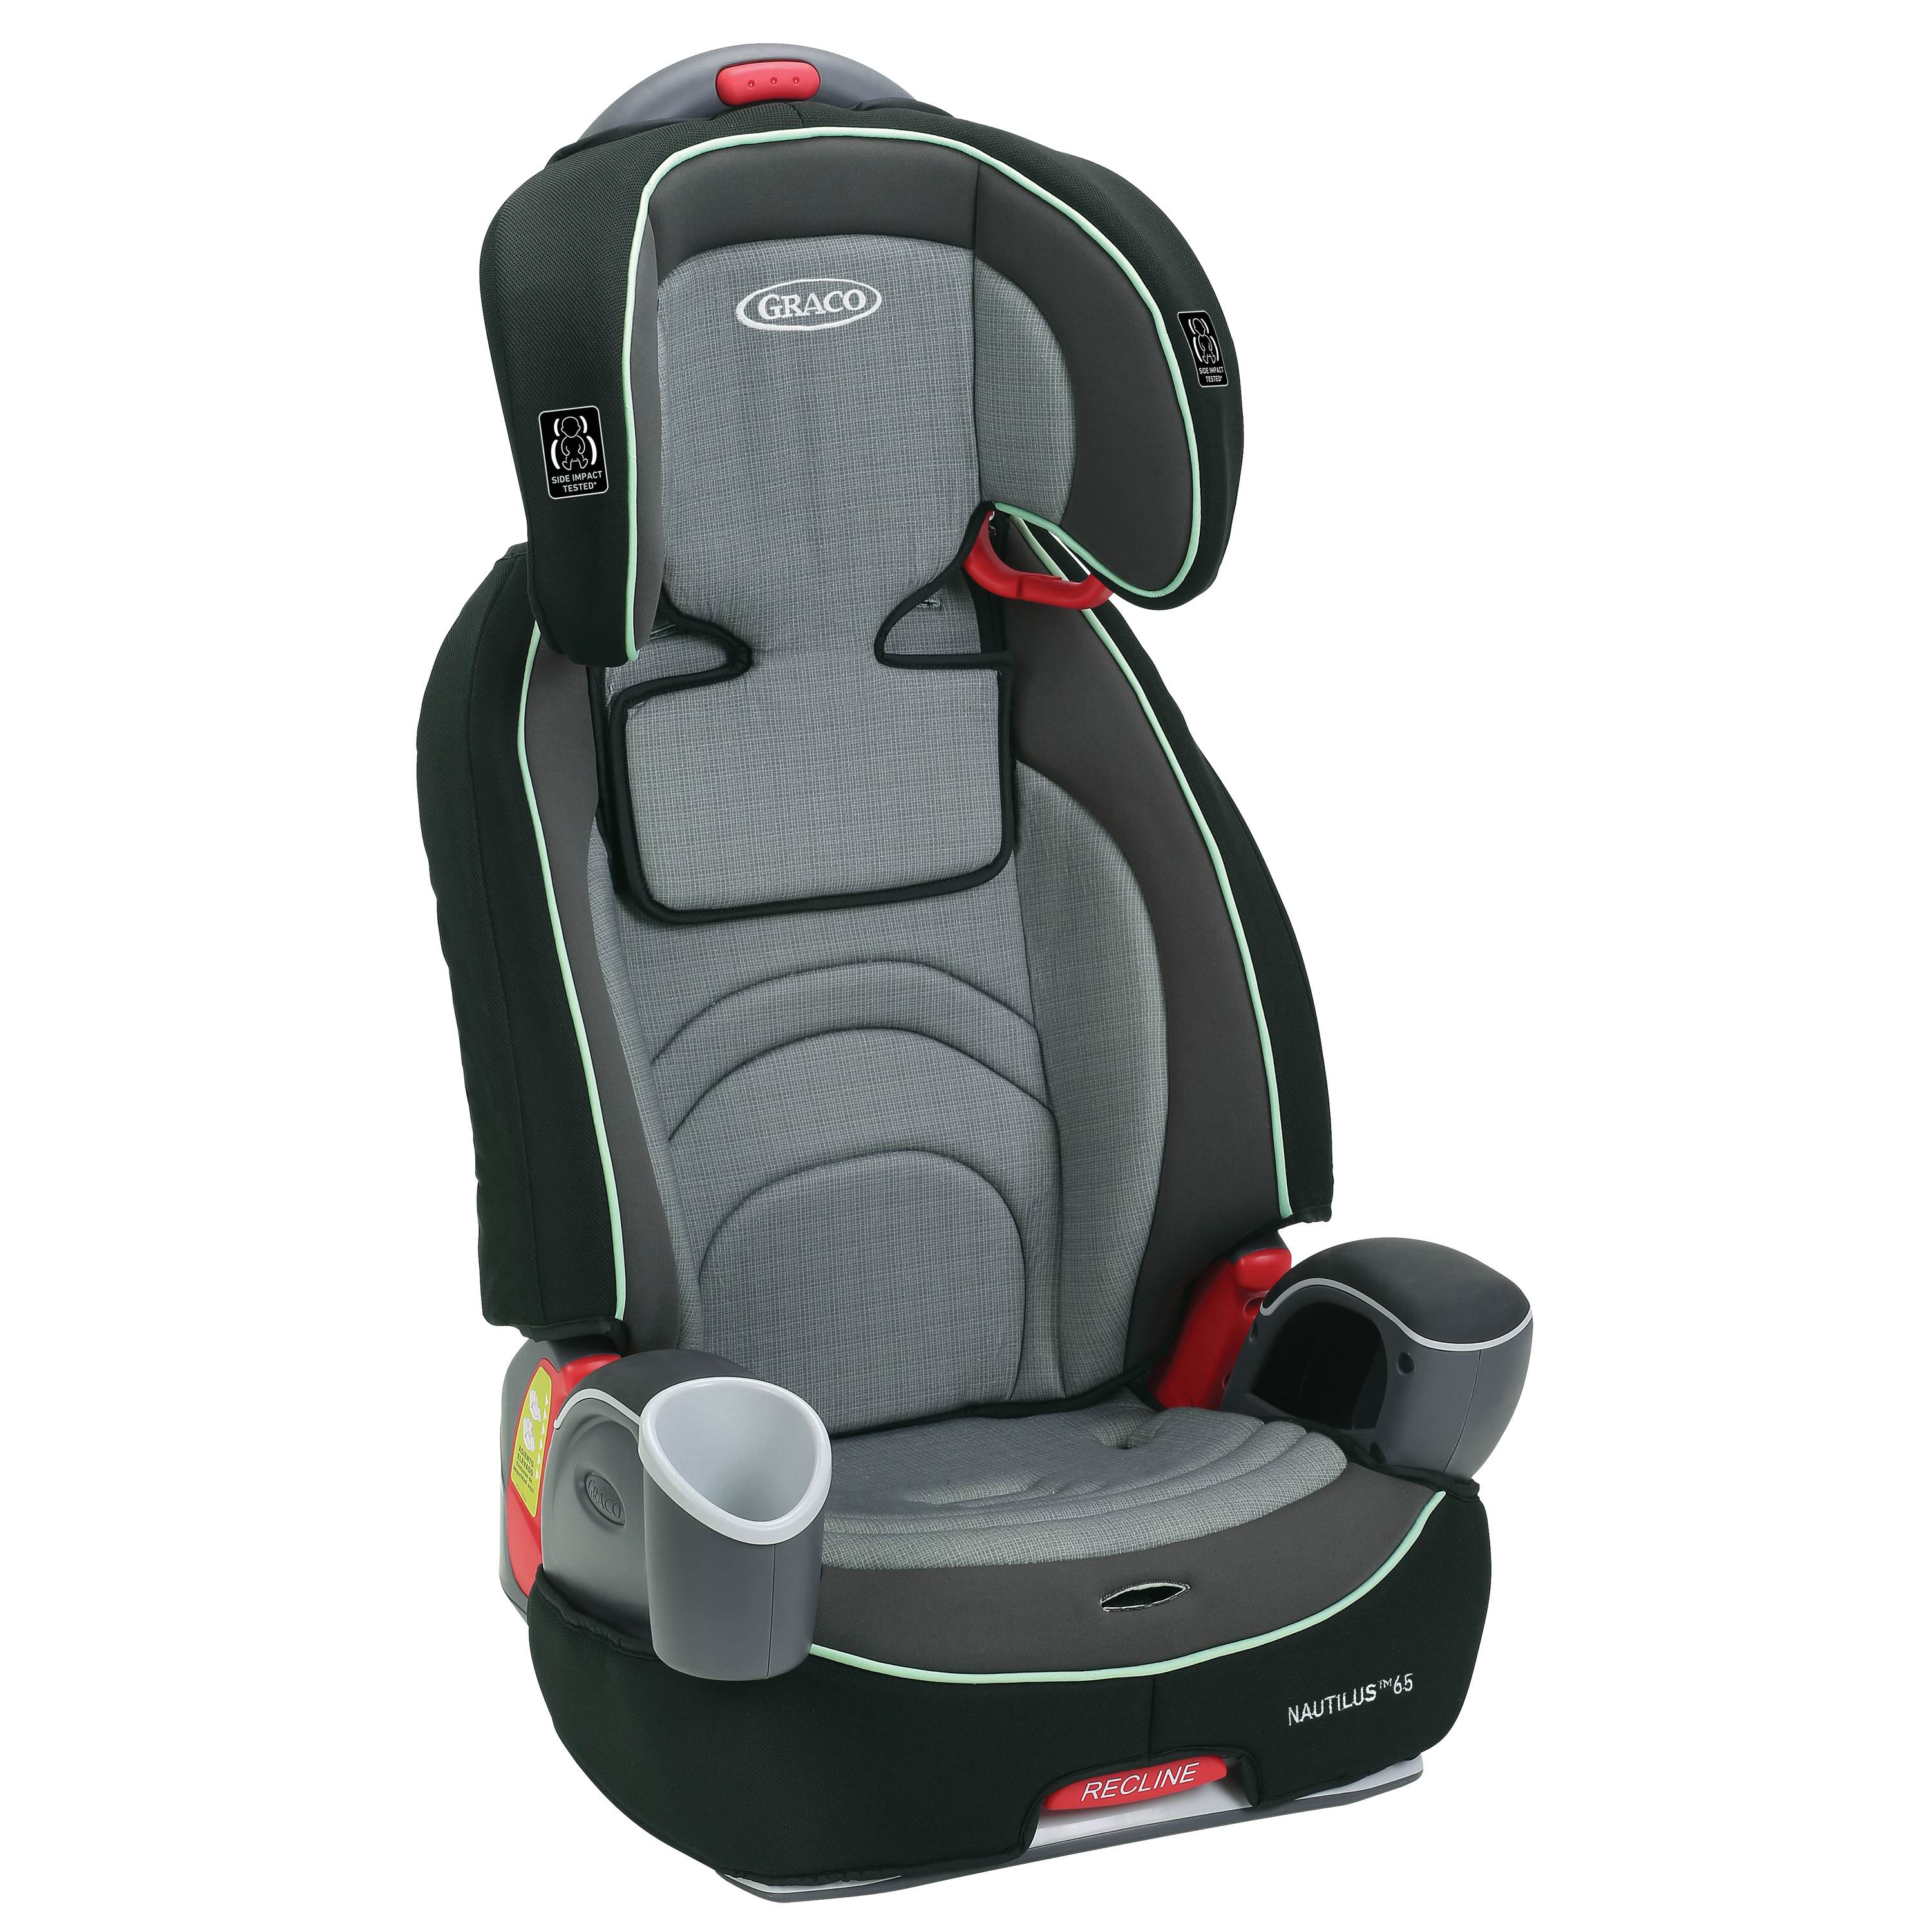 Graco Nautilus 65 3-in-1 Harness Booster Car Seat, Landry Lime - image 3 of 8